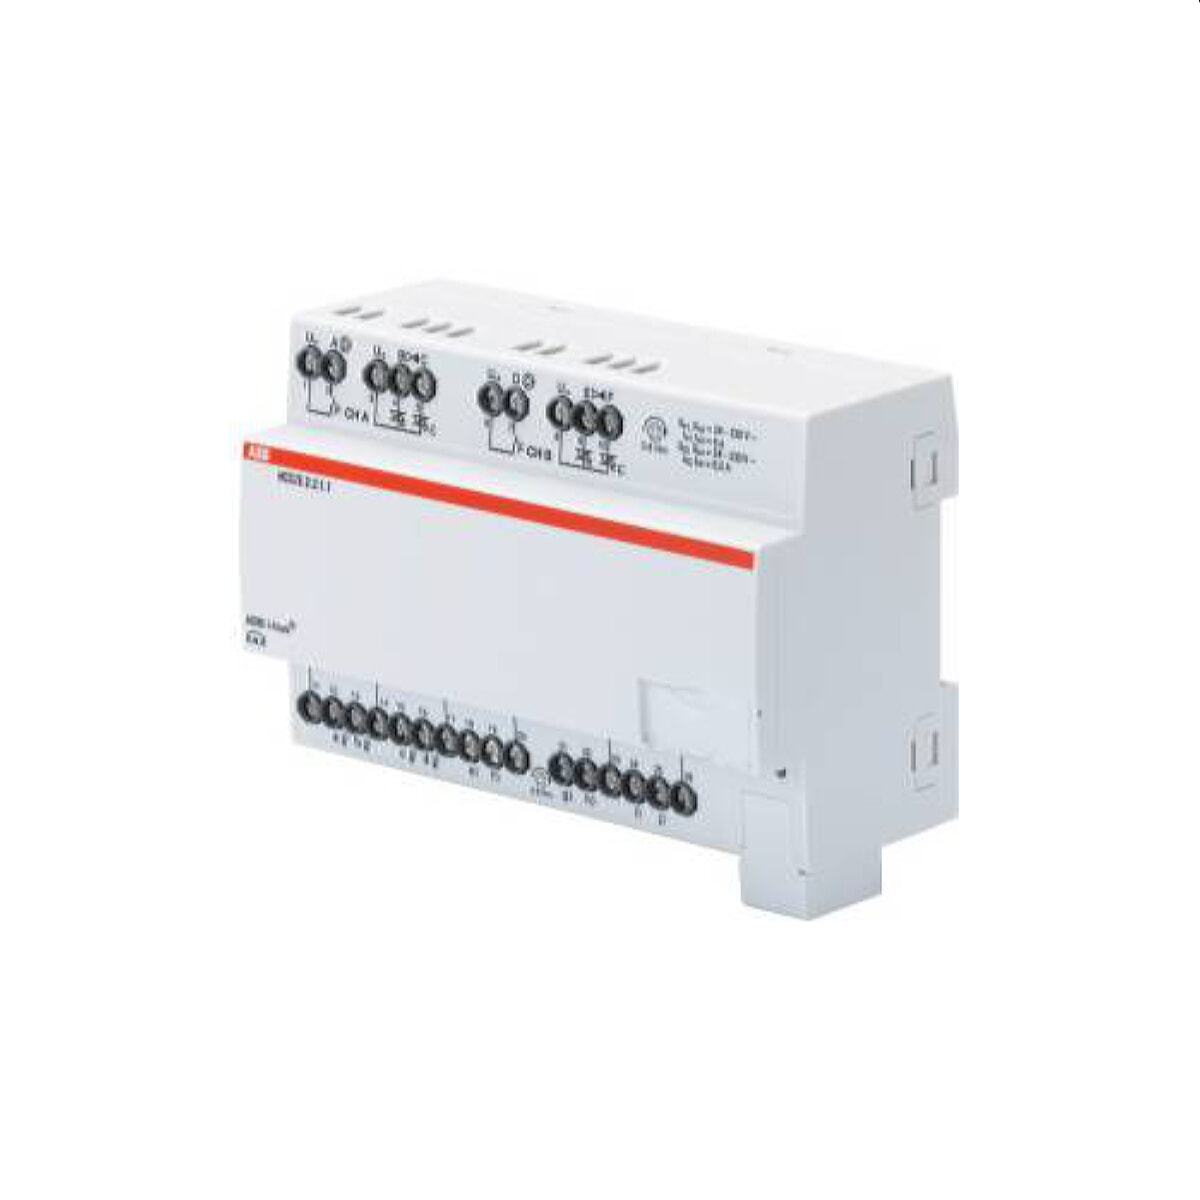 ABB Stotz contact heating and cooling circuit controller HCC/S2.2.1.1 3-pin 2-gang 2CDG110220R0011